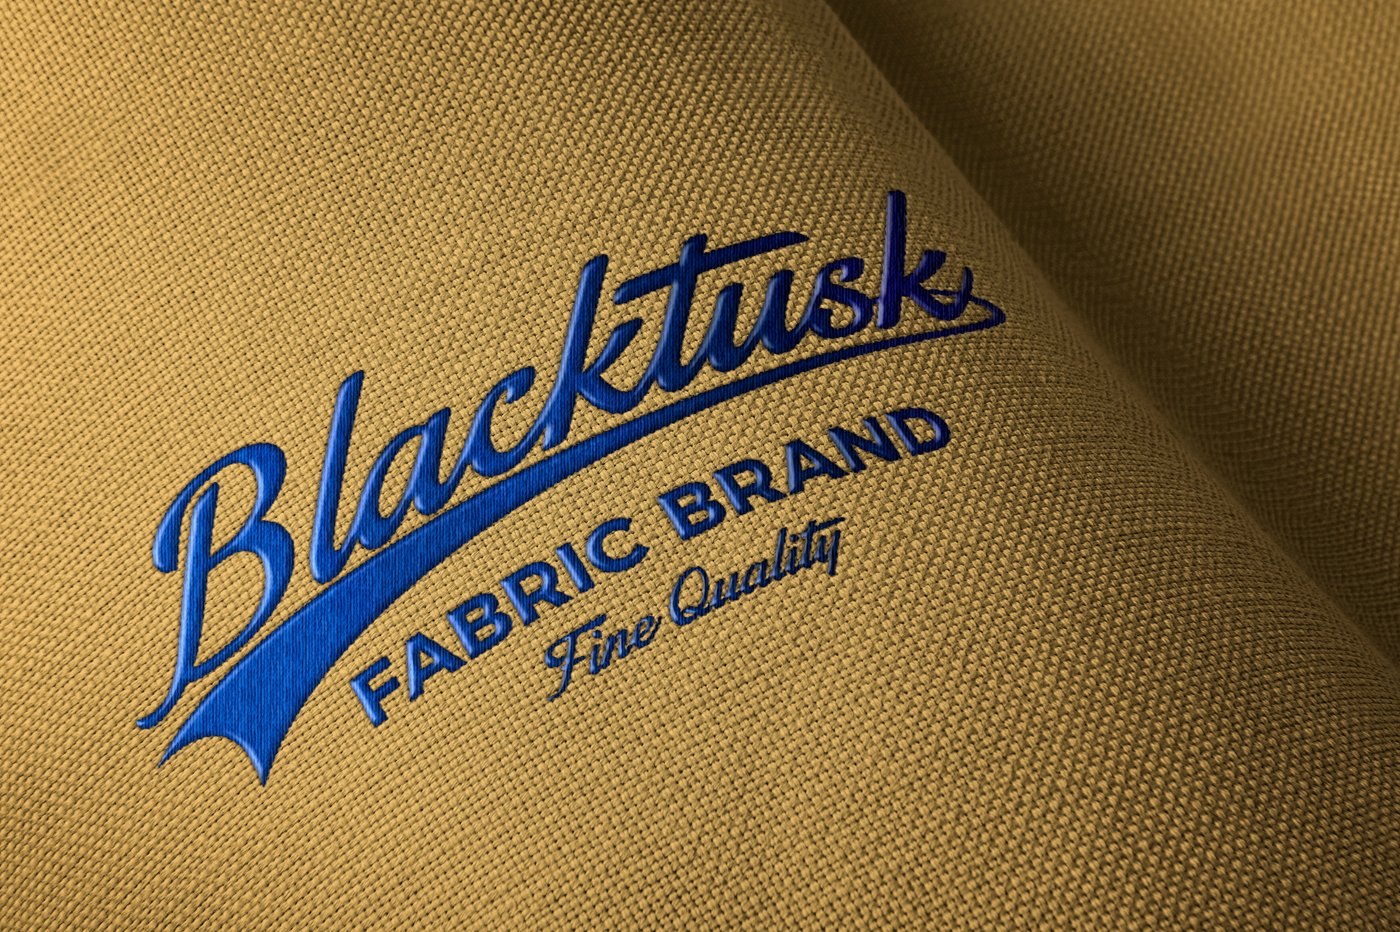 Embroidered Fabric Logo Mockup cover image.